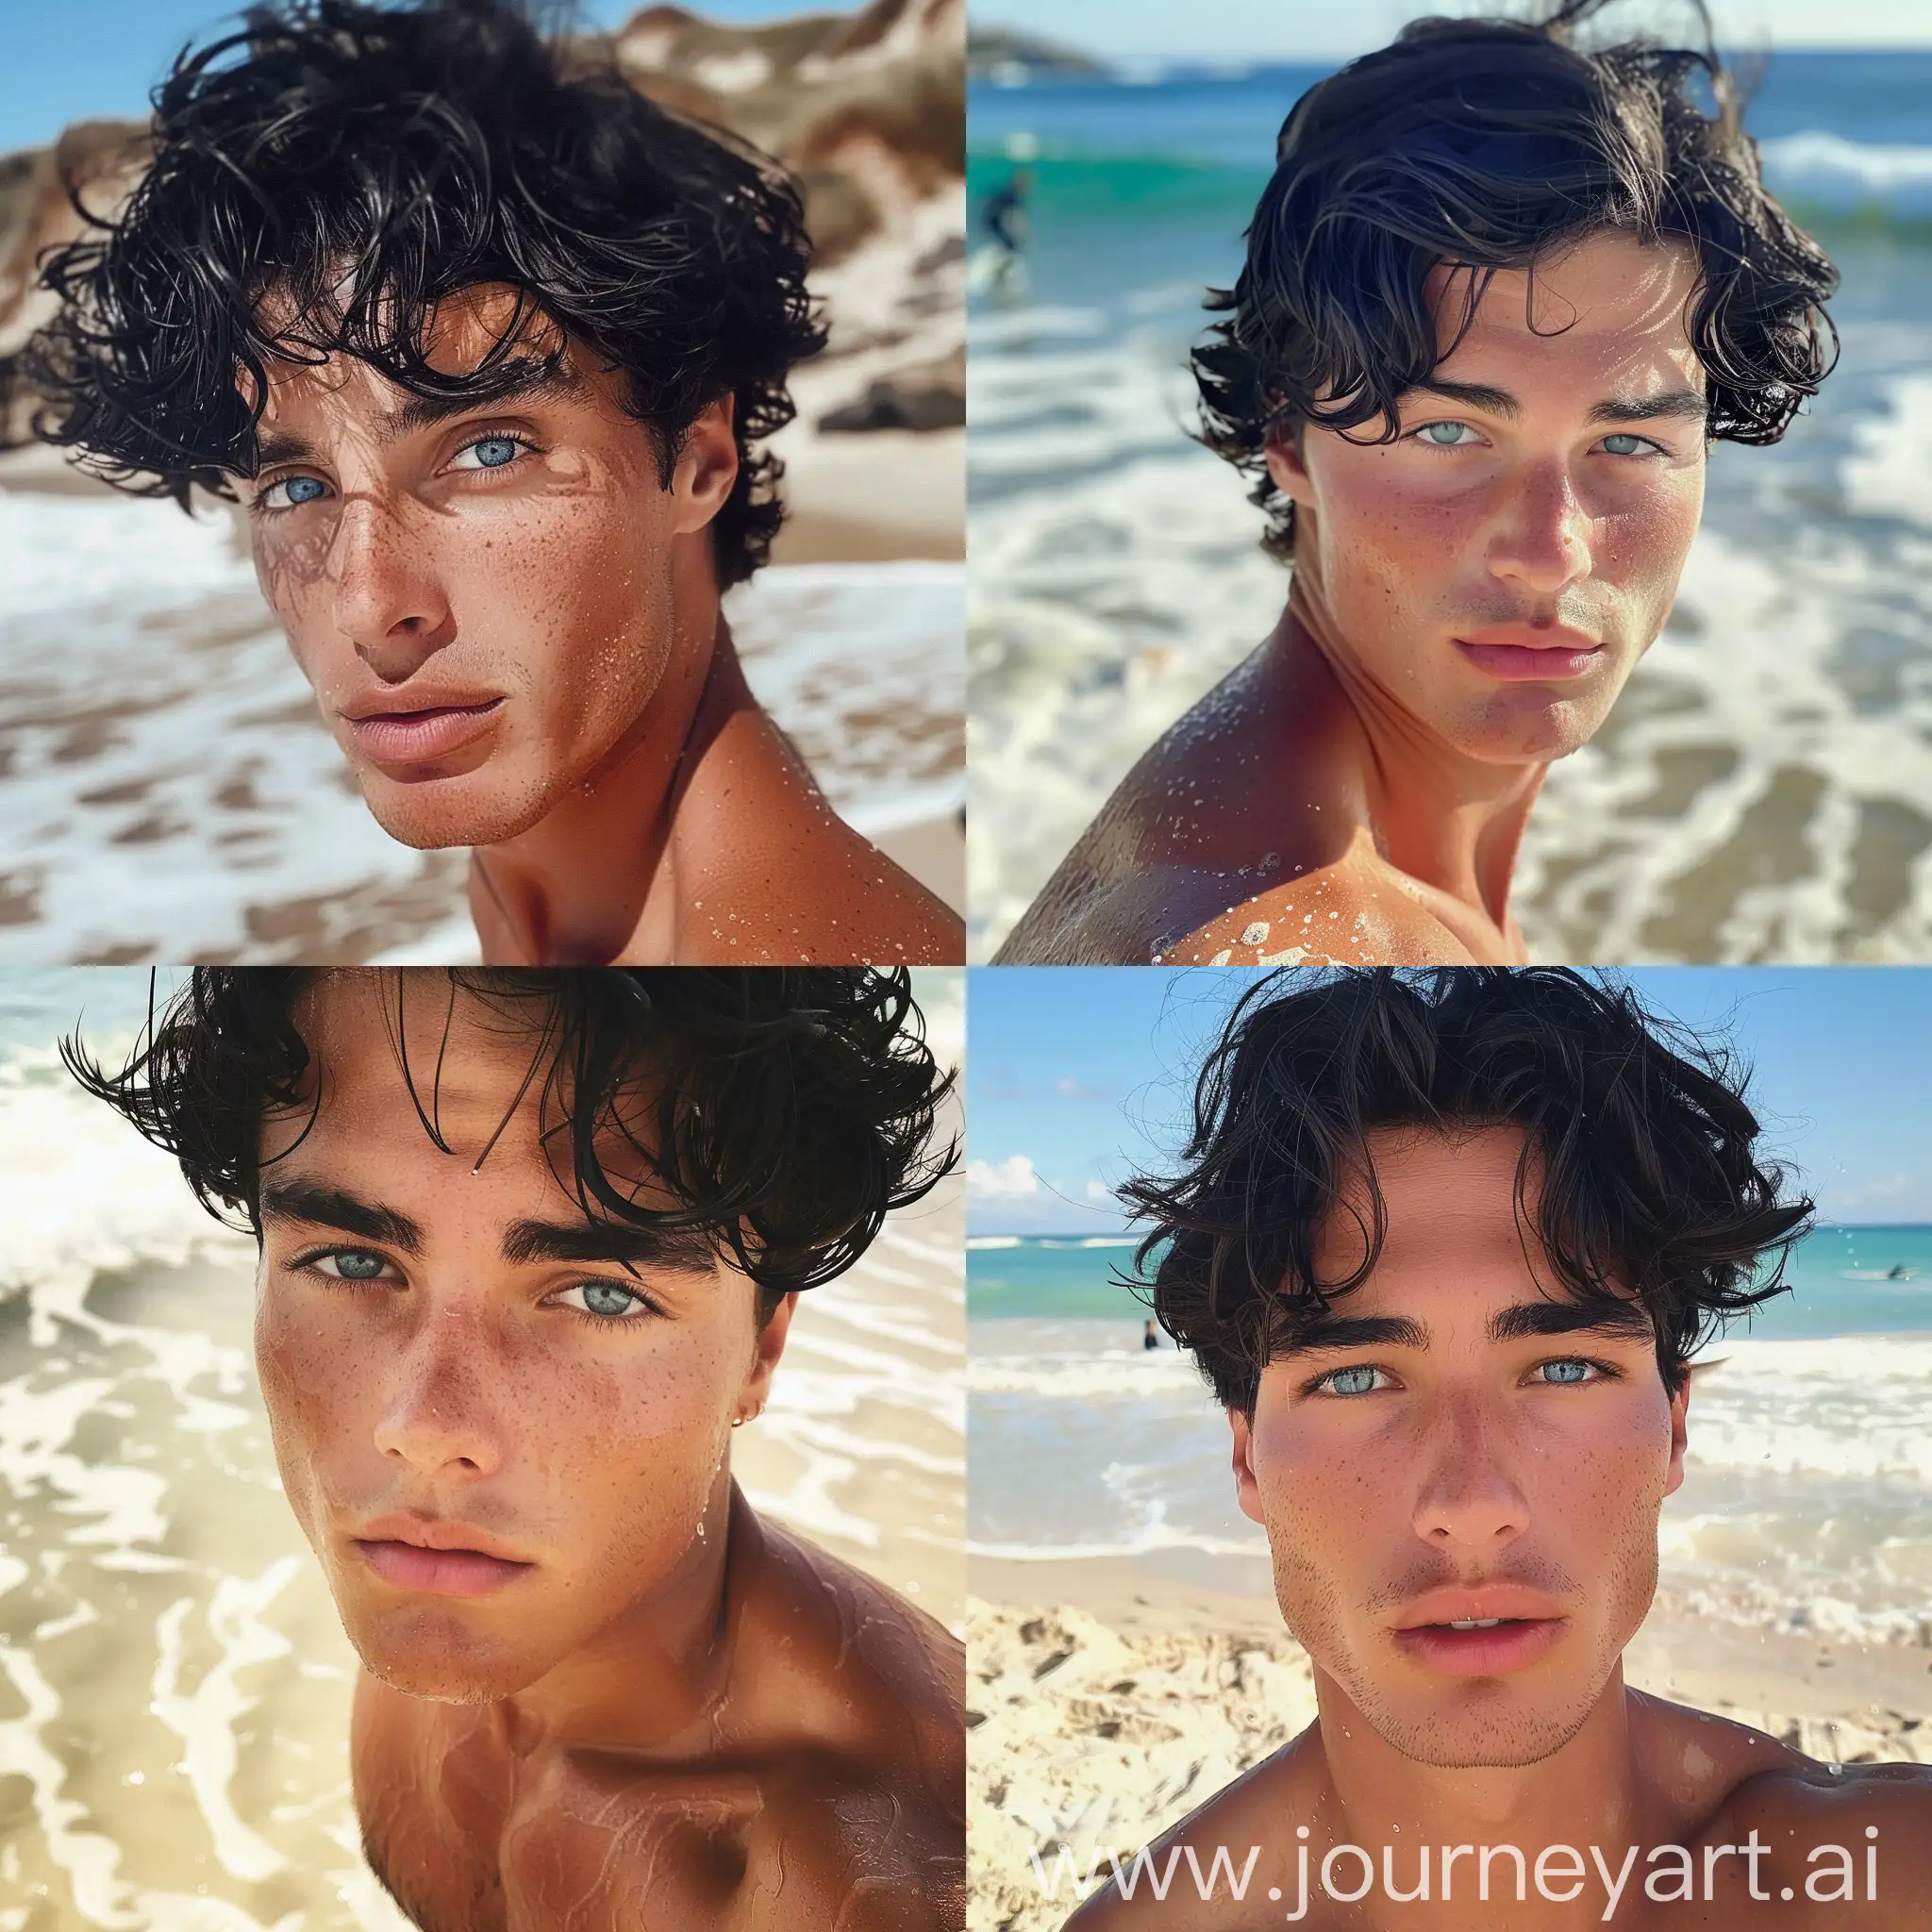 Muscular-19YearOld-Surfer-with-Long-Black-Hair-and-Ocean-Blue-Eyes-Catching-Waves-on-Beach